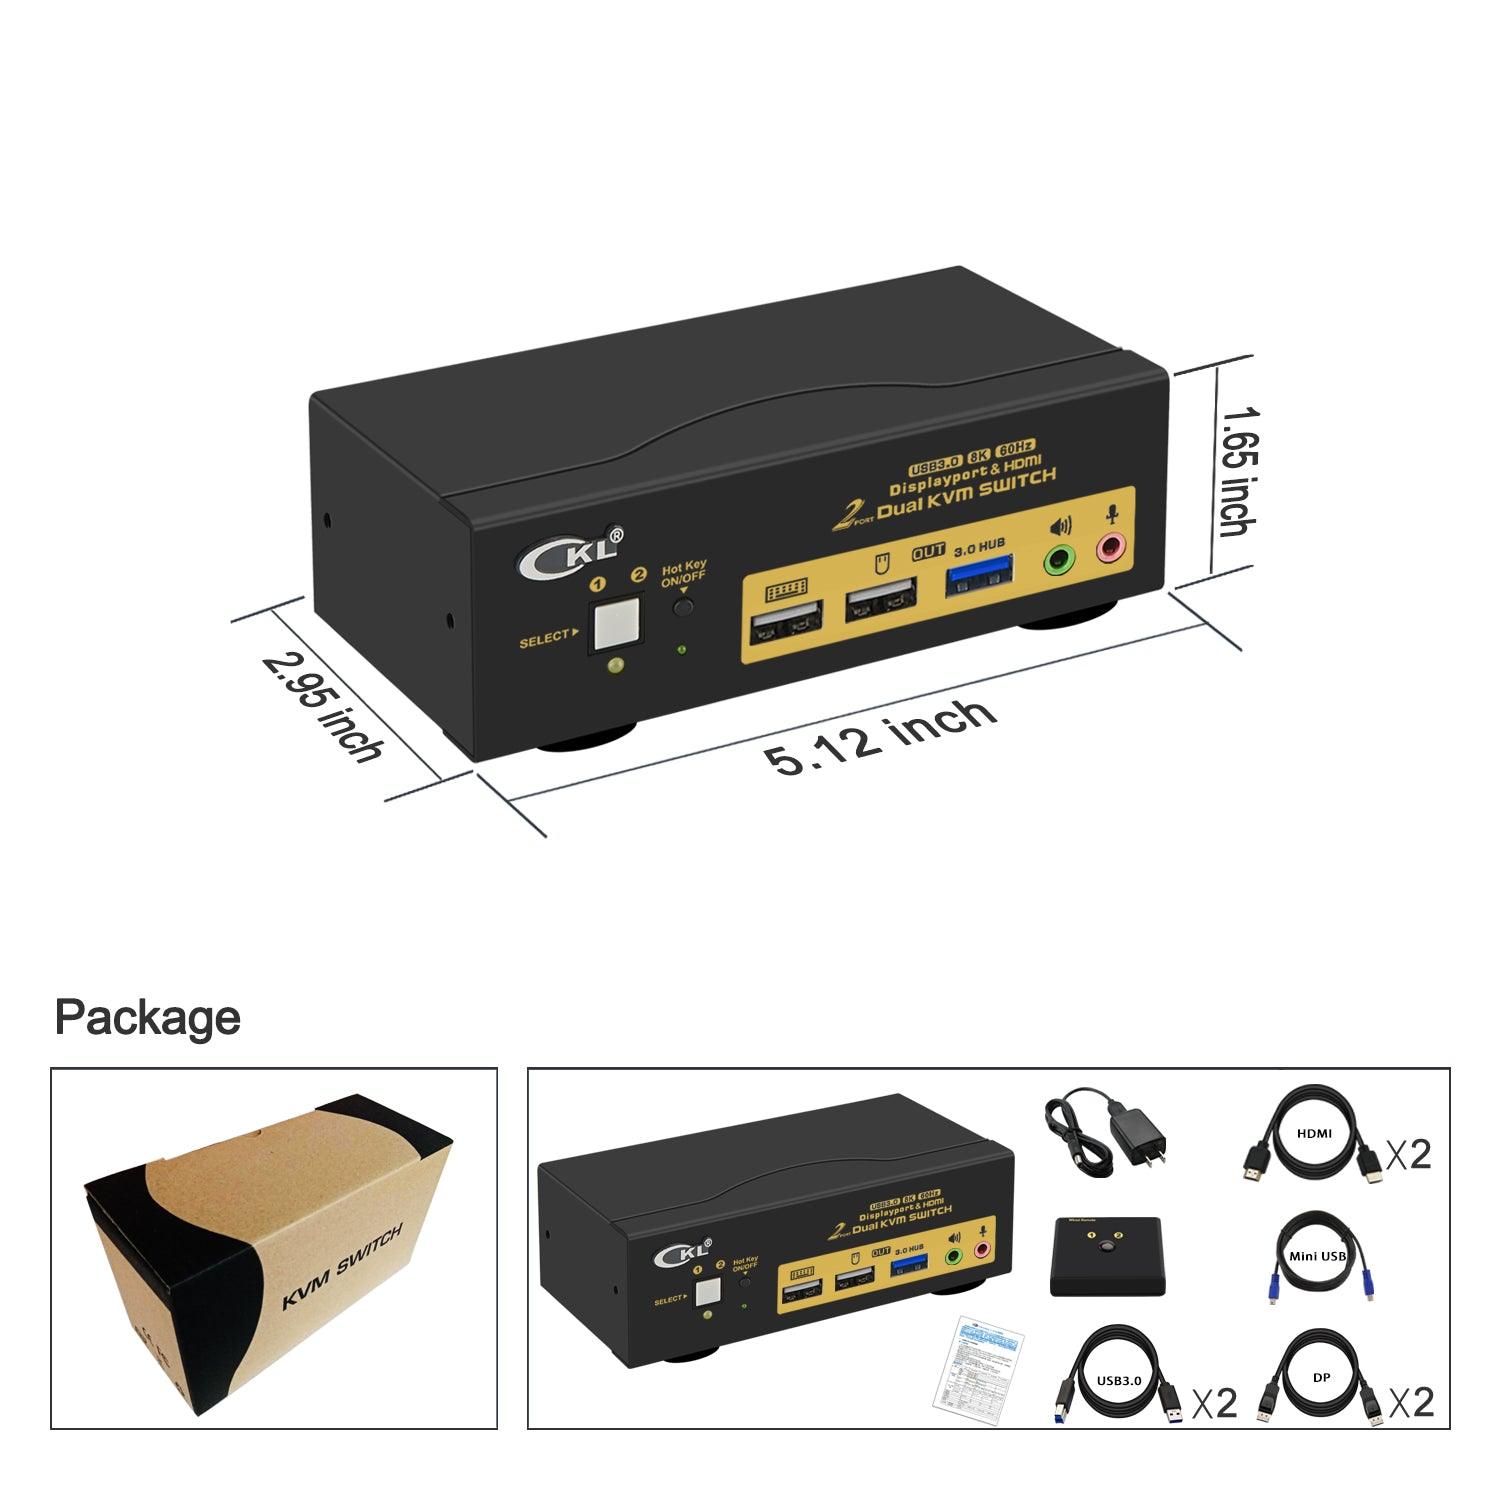 CKL 2 Port USB 3.0 KVM Switch Dual Monitor HDMI 2.0 4K@60Hz(HDMI Out) + DisplayPort 1.4 8K 30Hz 4K 120Hz 144Hz (DP Out), Keyboard Video Mouse Peripherals Switcher for 2 Computers 2 Monitors with Audio (622DH-4) - CKL KVM Switches